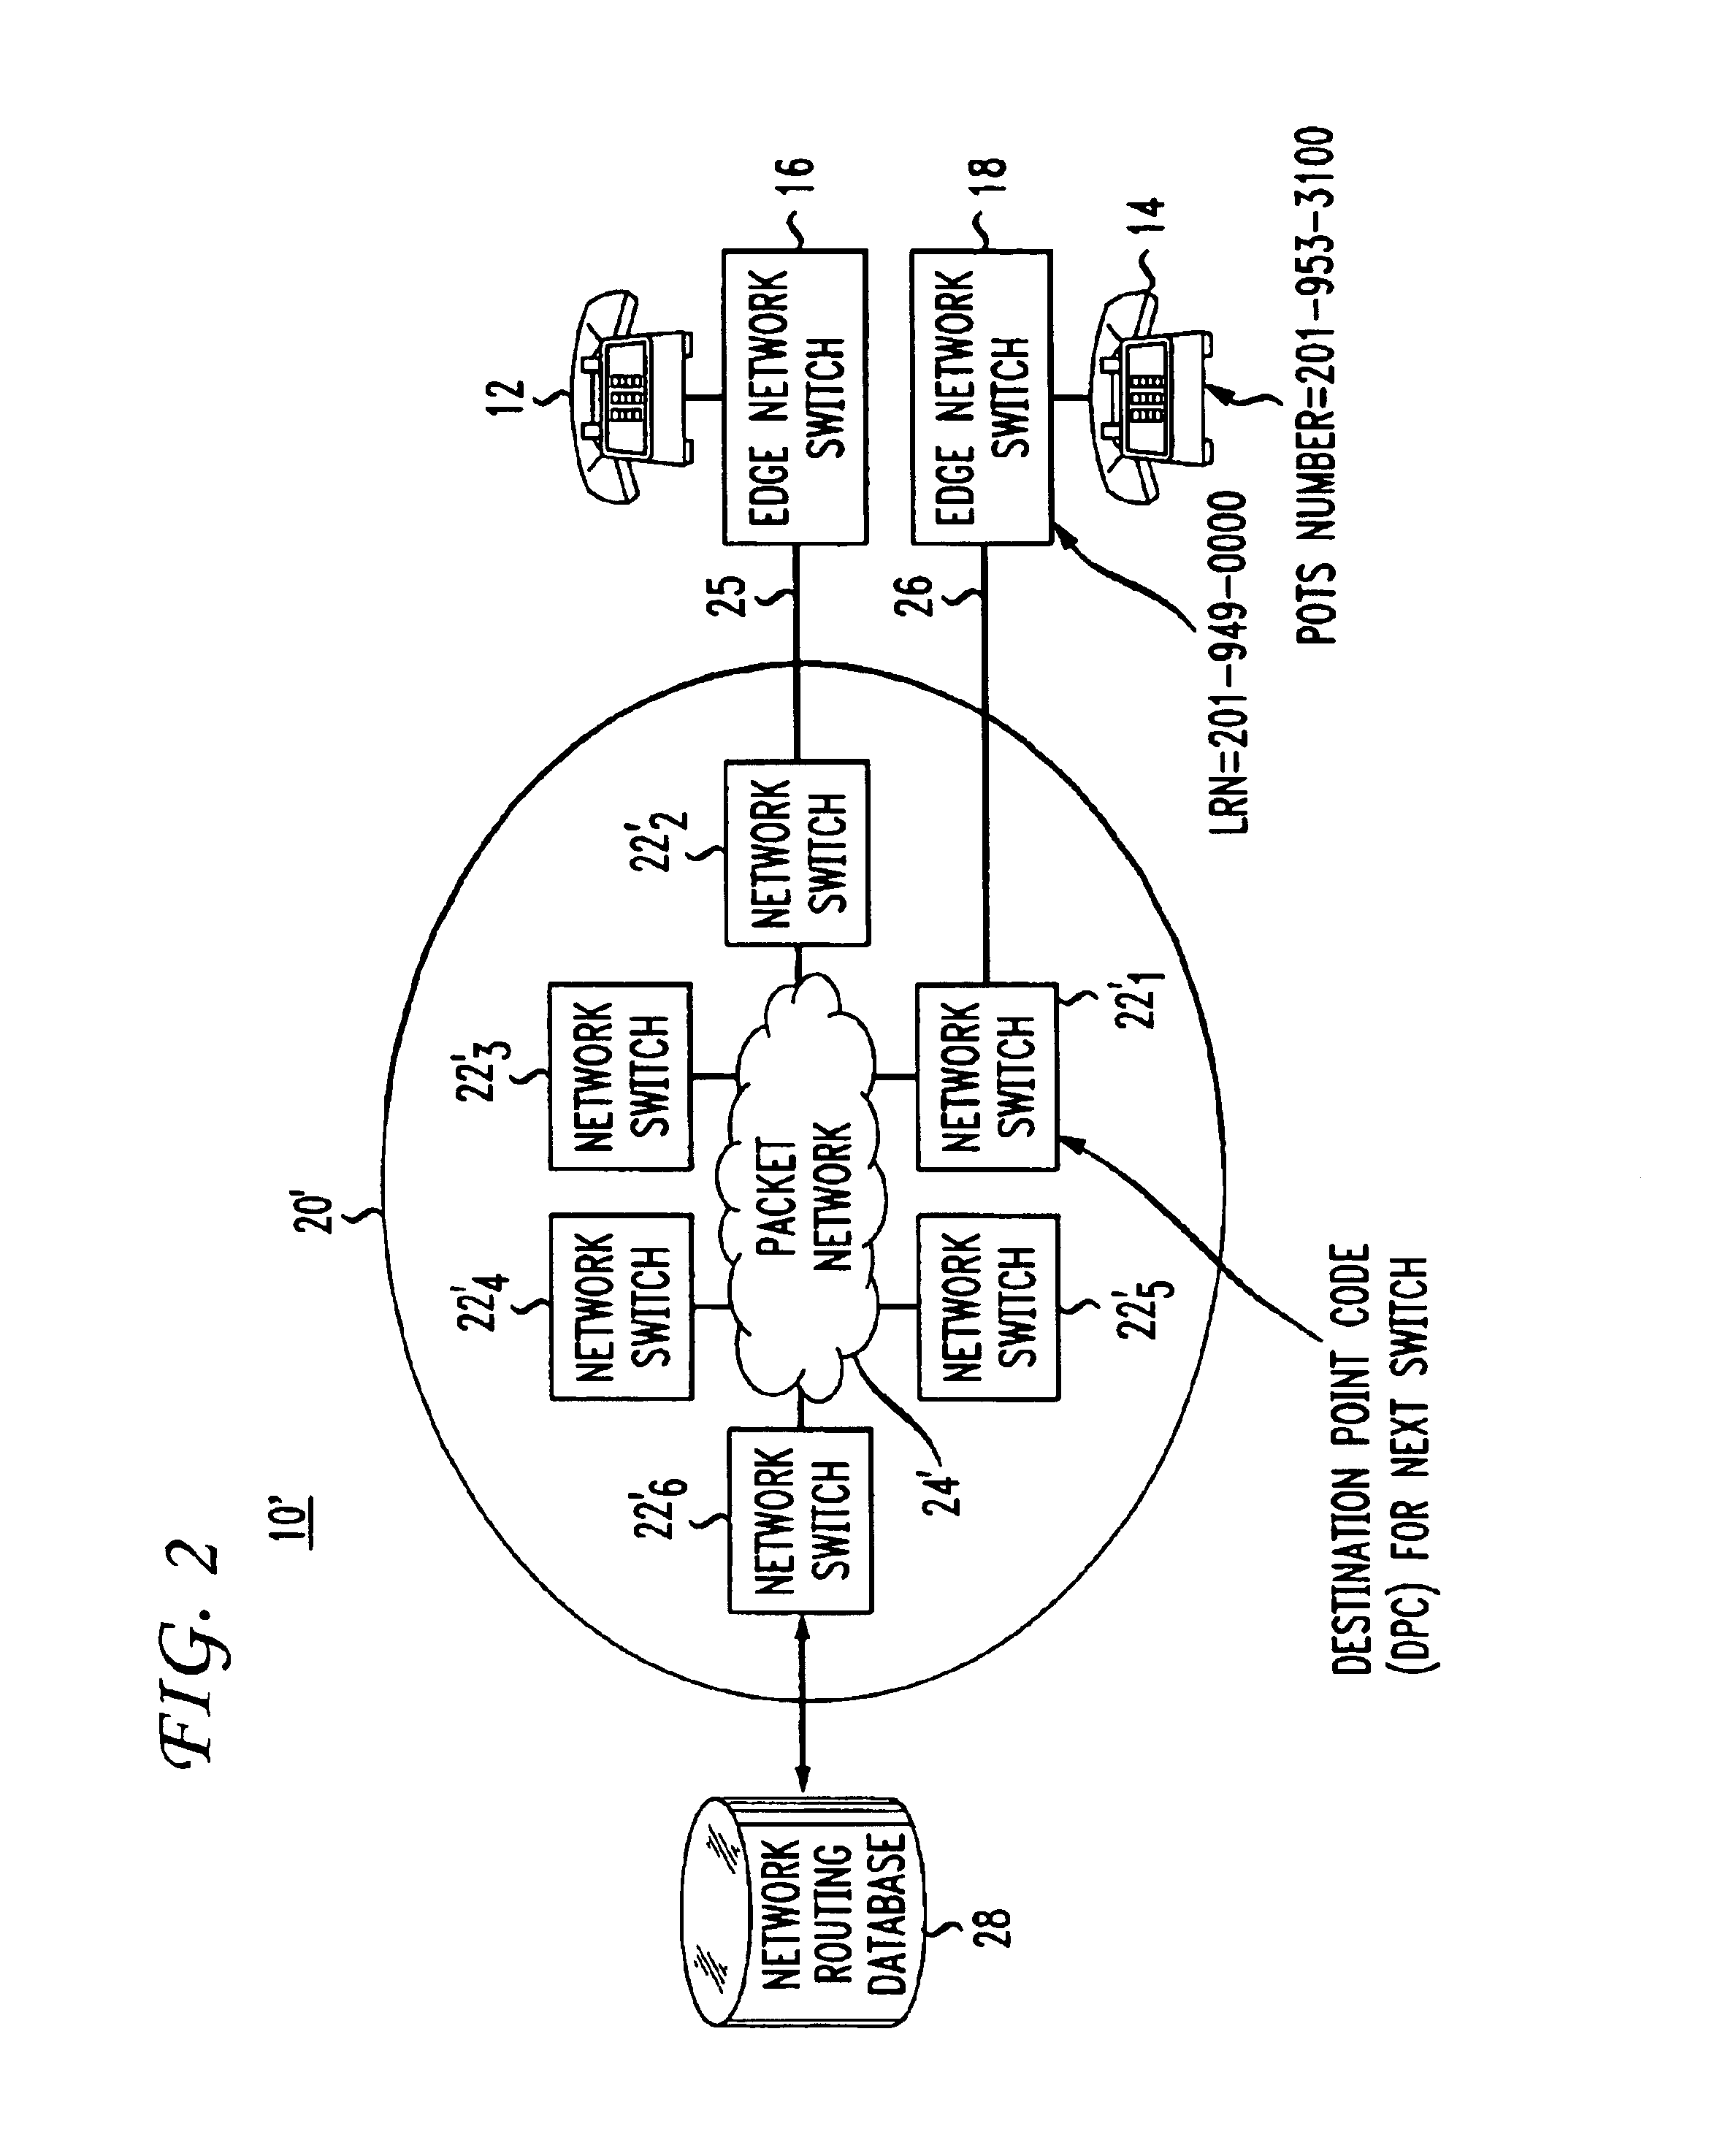 Method and apparatus for providing telecommunications services